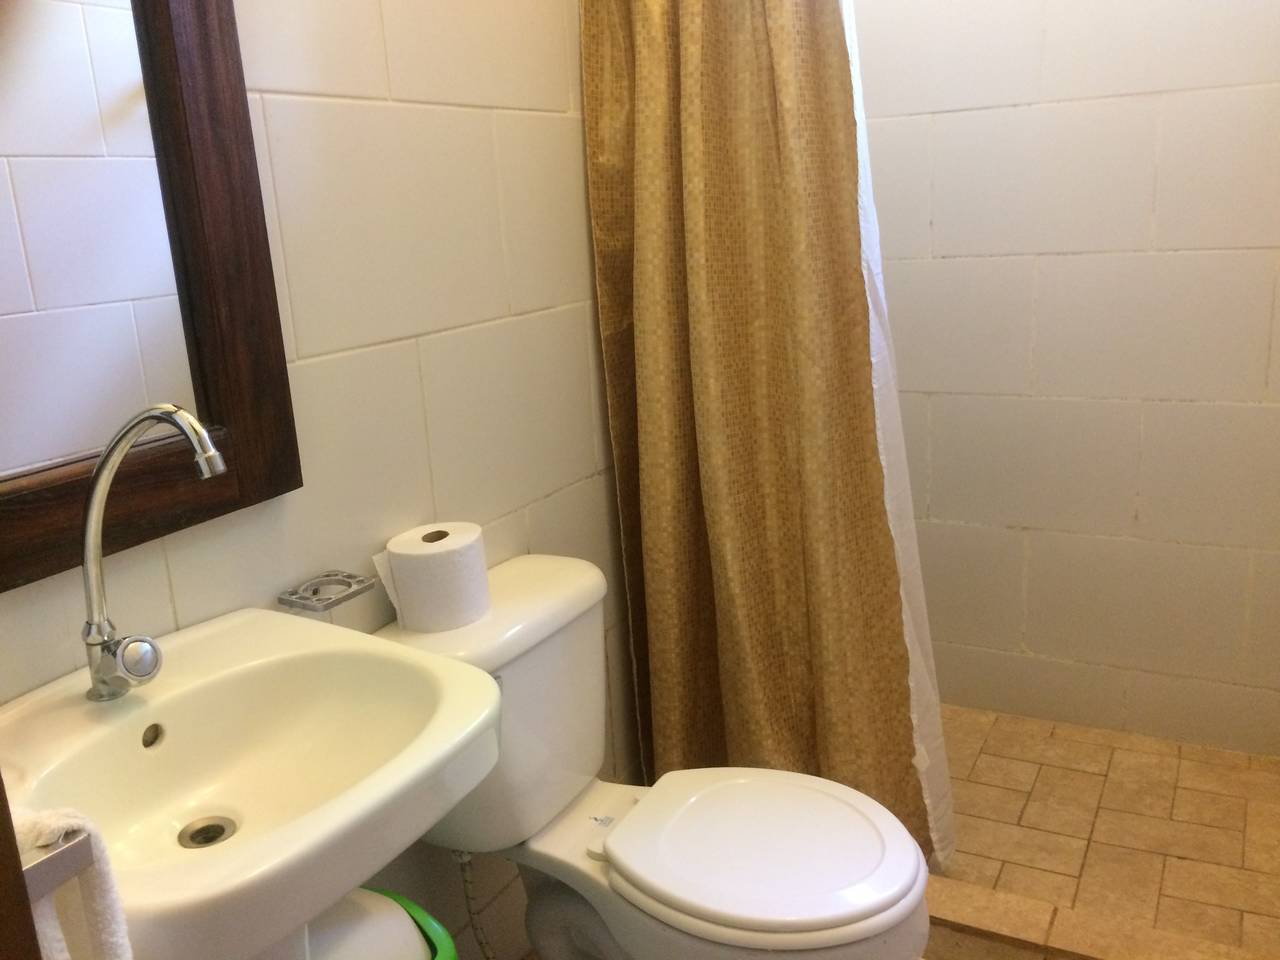 Shared bathroom with hot water shower